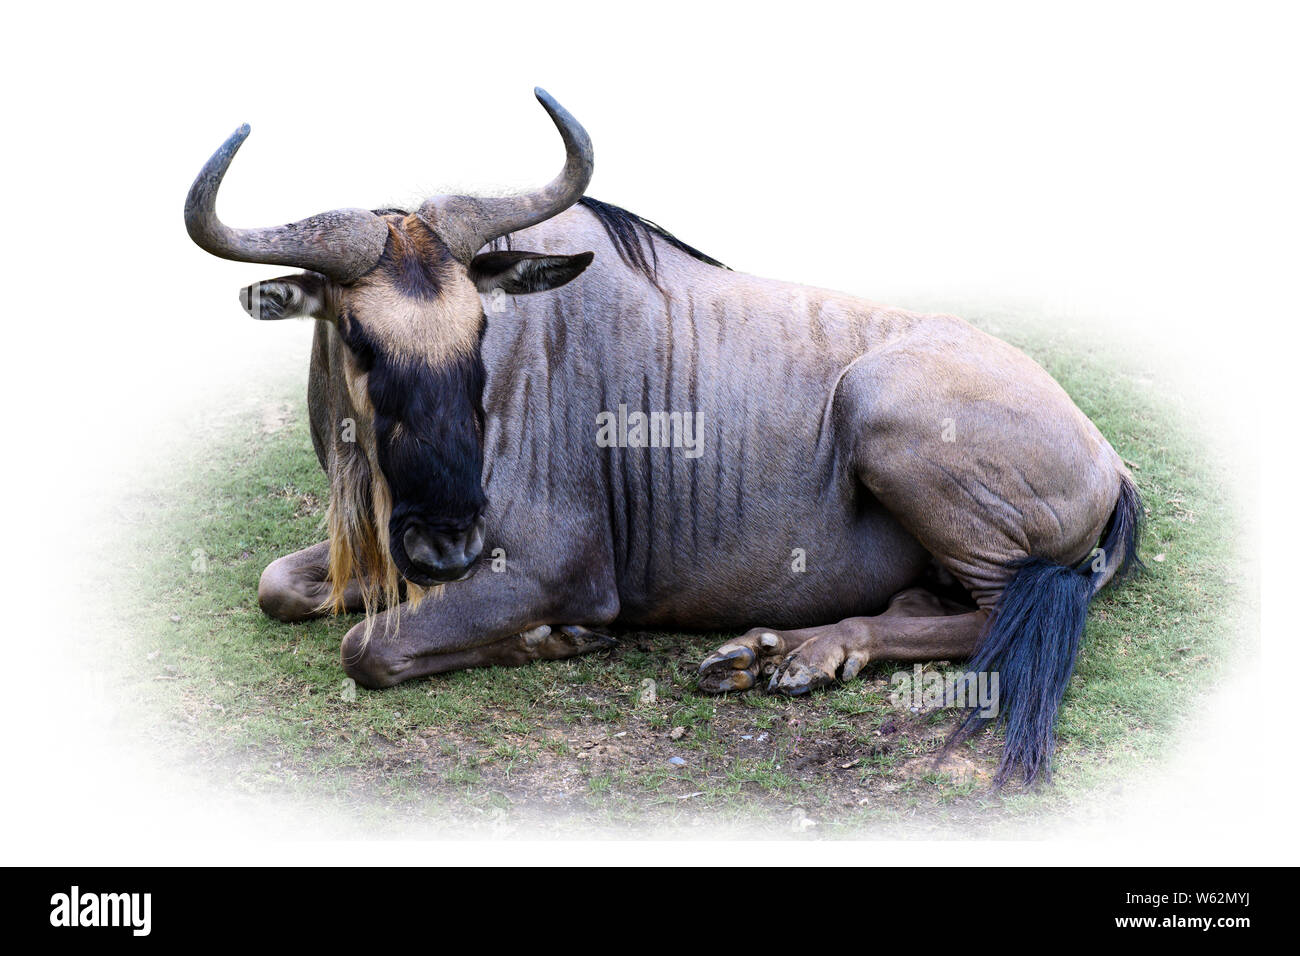 Wildebeest, Gnu,  facing forward lying on grass, isolated on white background Stock Photo